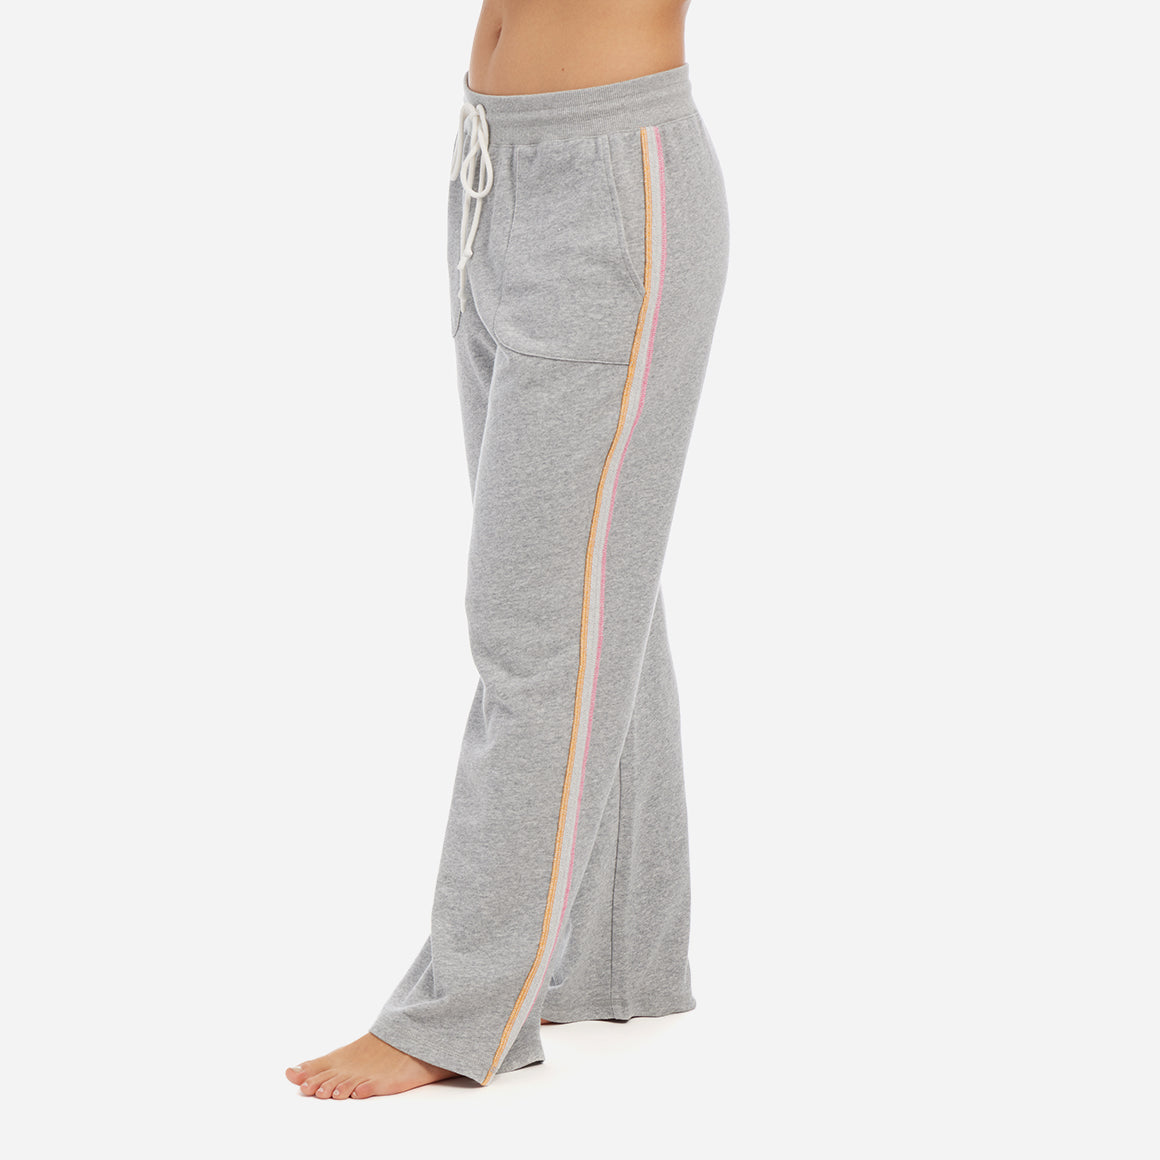 These cozy lounge pants feature a relaxed fit and an elastic waistband with an adjustable drawstring to provide a customized and secure fit. The neon stripes along the side seams add a modern pop of color, while the convenient hip pockets will make this your go-to sweatpants.